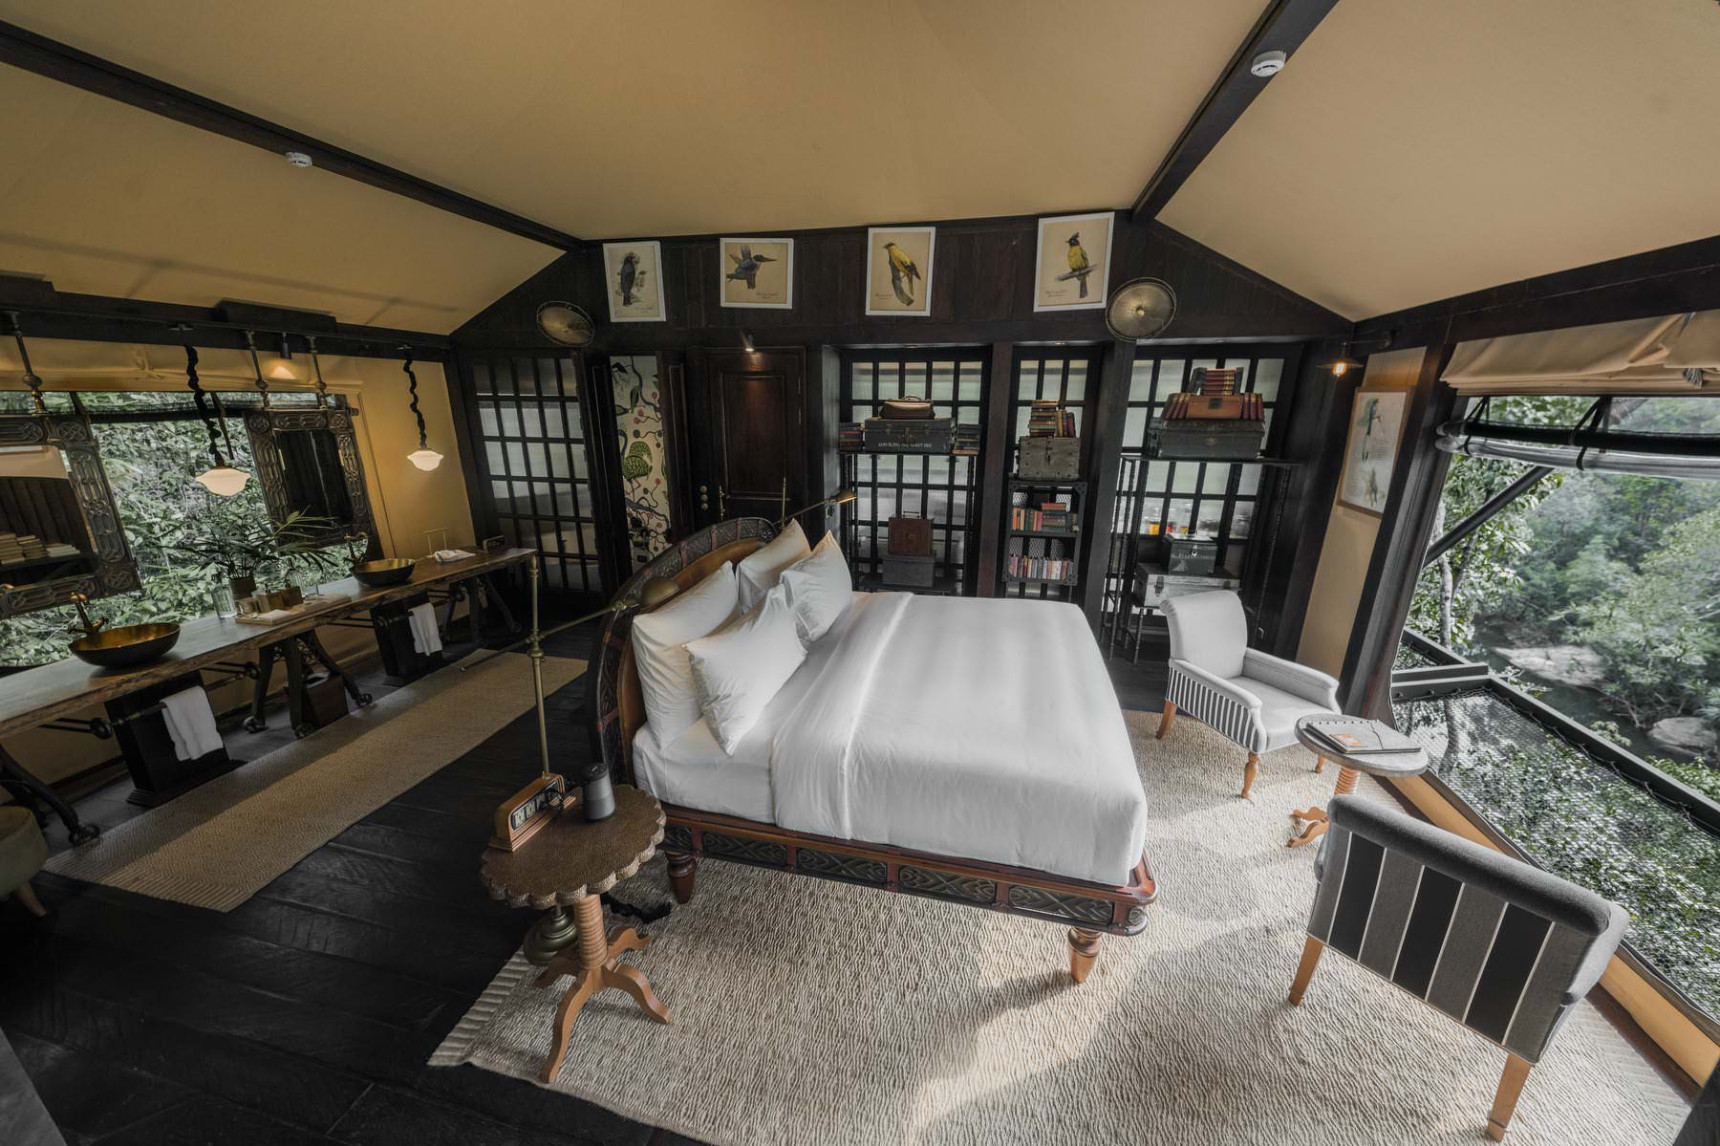 The five-star tent lodges have been named like The Great Conservationist. The Birders tent lodge marks Jackie Kennedy's visit to Cambodia in 1967